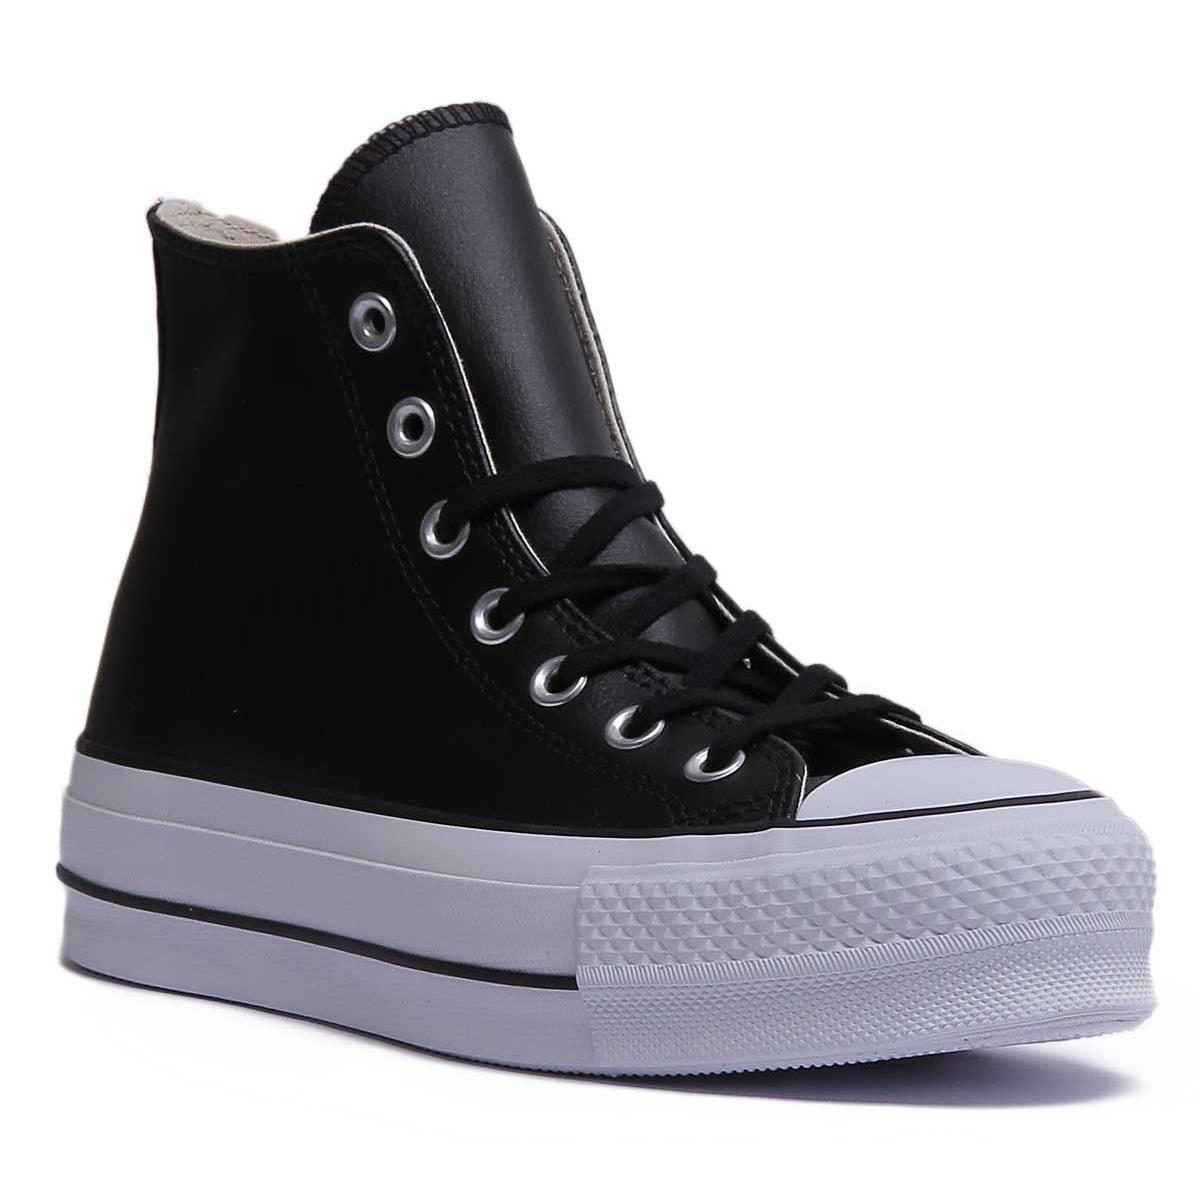 Converse 561675C A-ct As Lift Hi Lace Up Platf In Black White Size US 5 - 11 Black White